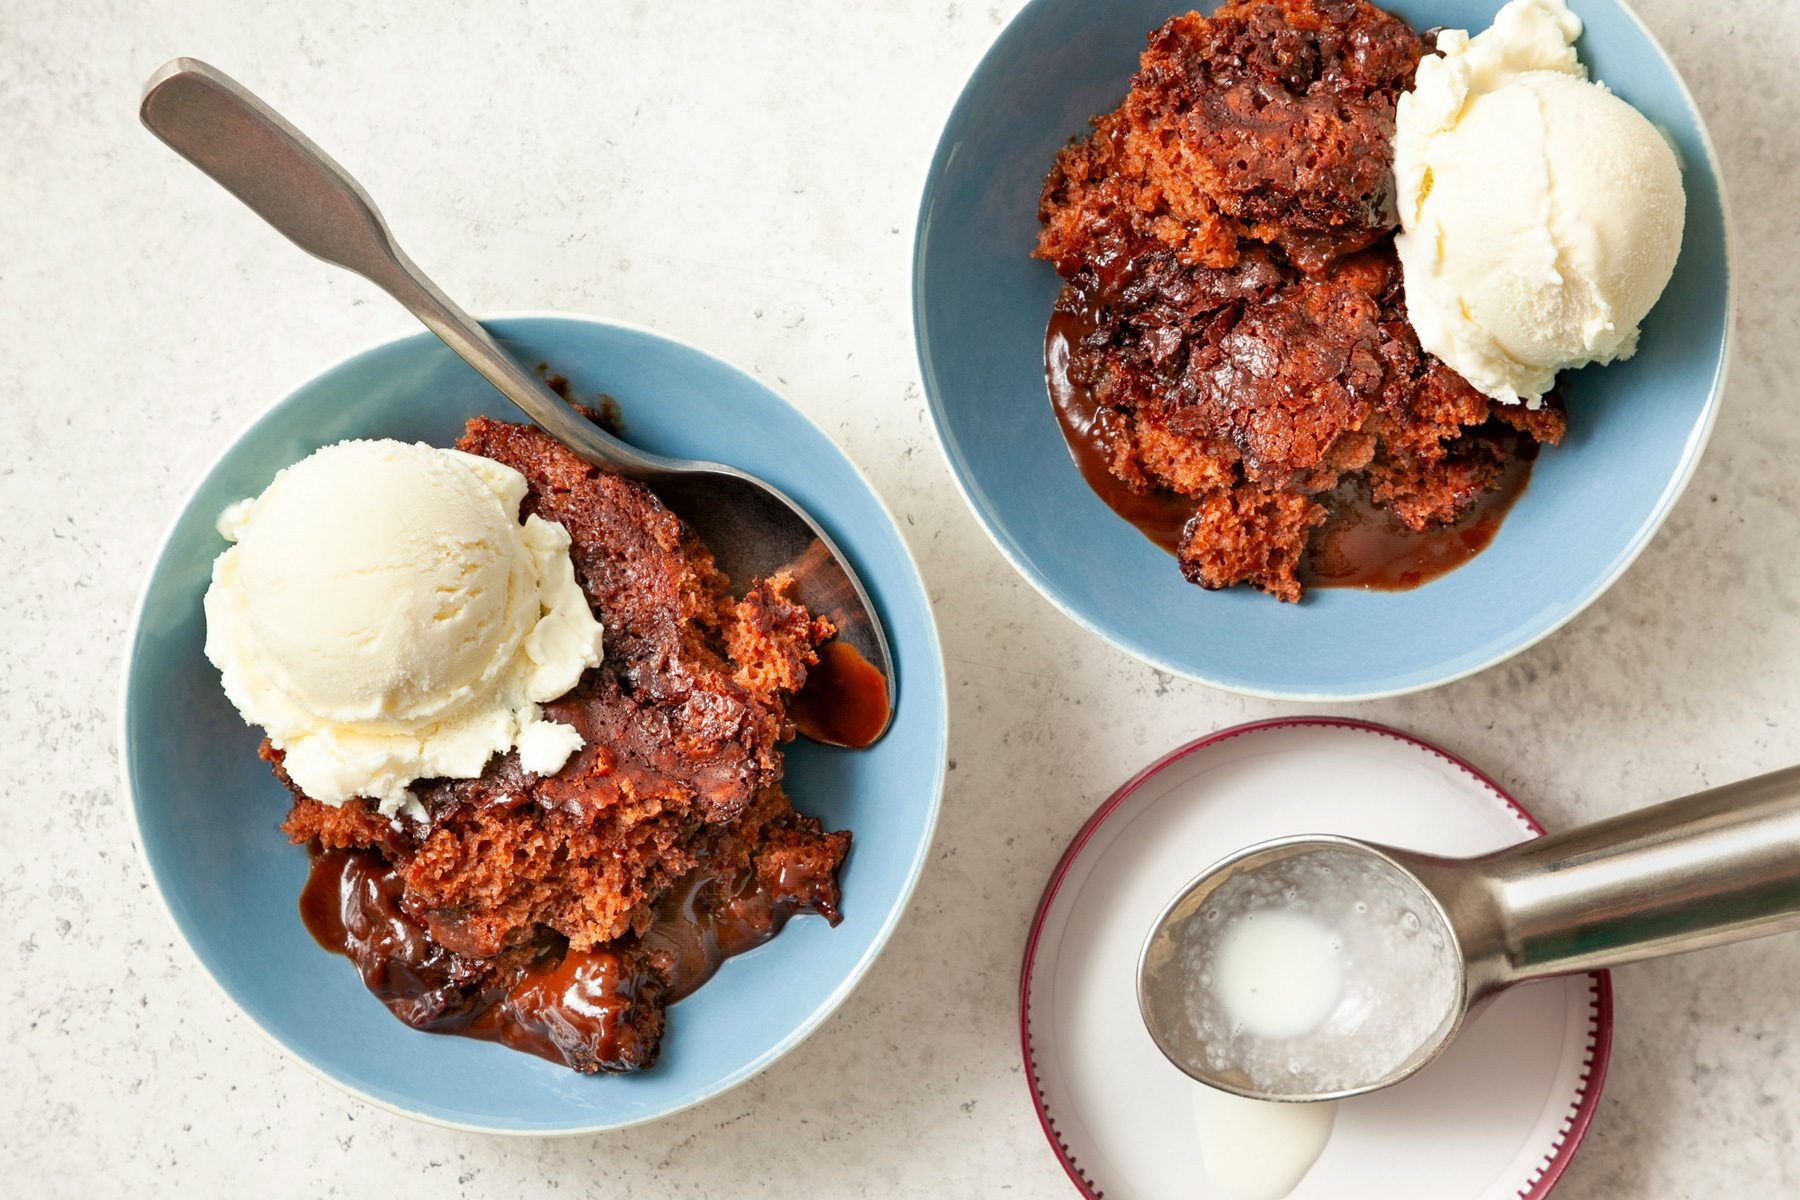 Two bowls of Chocolate Cobbler served with ice cream